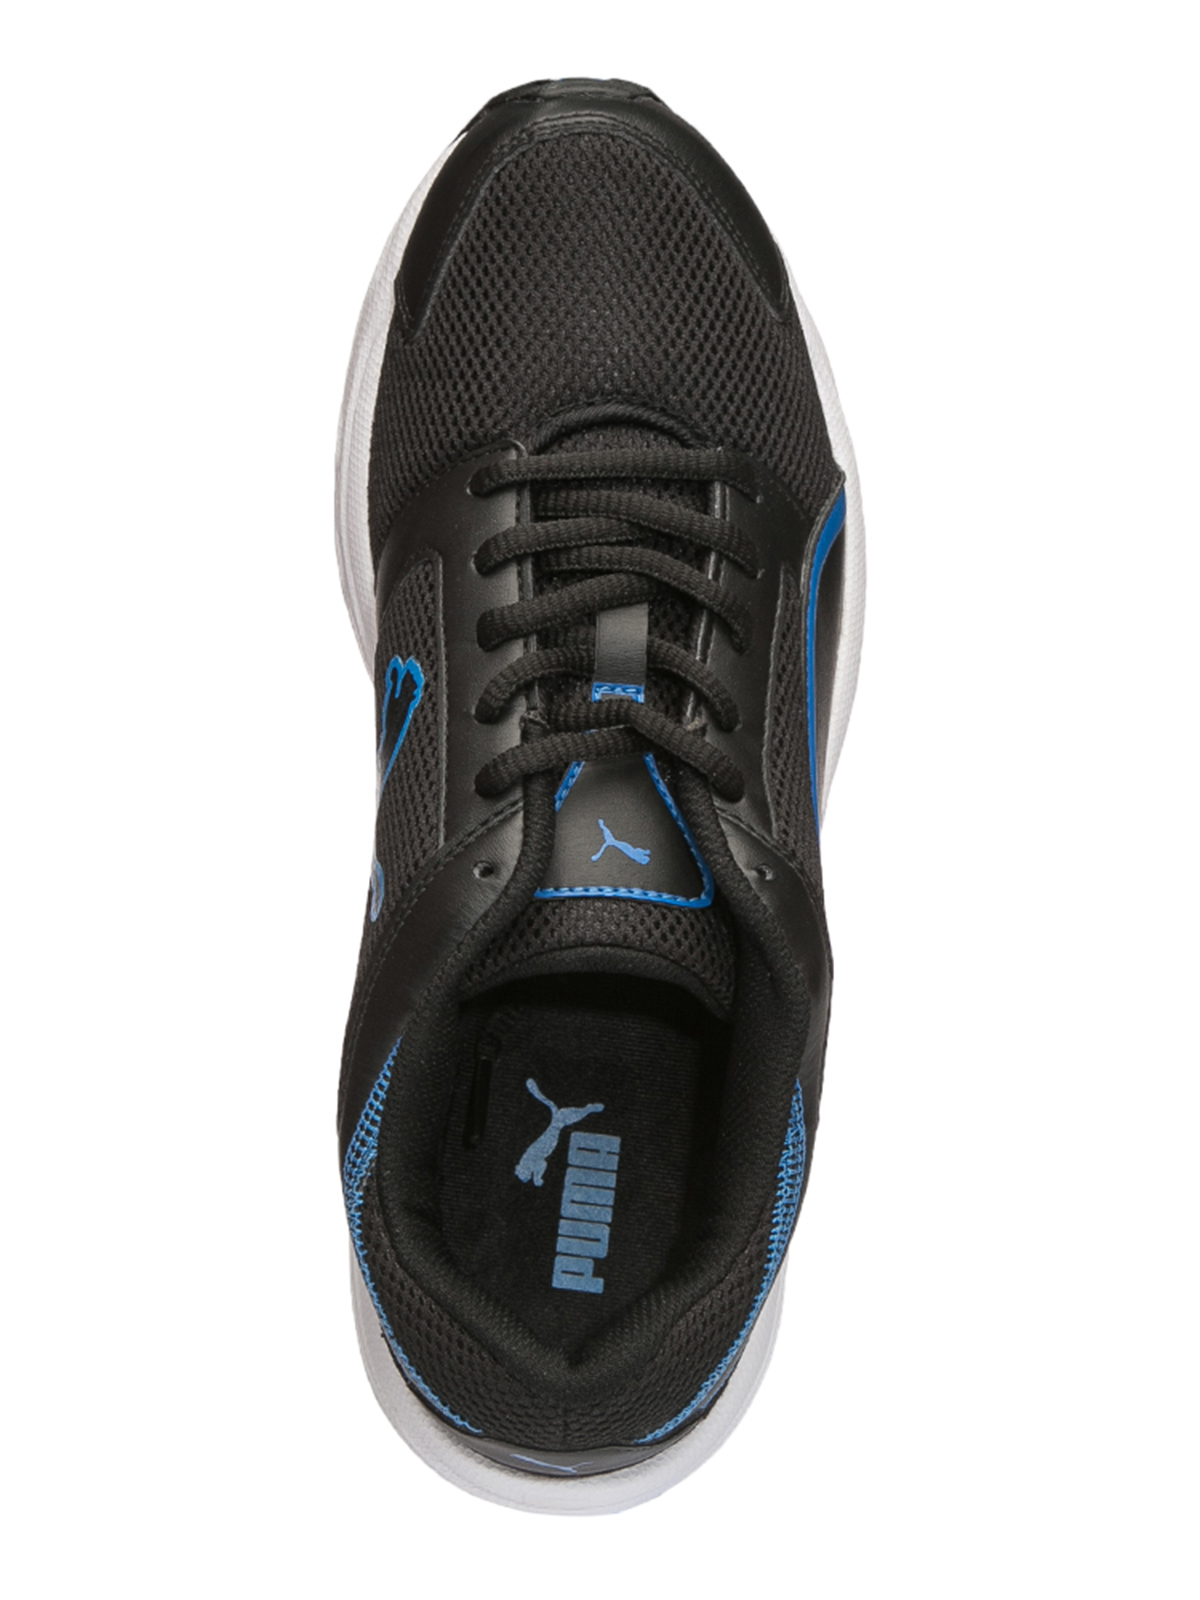 Buy Puma Men'S Black & Blue Running Shoes Online @ ₹1449 from ShopClues